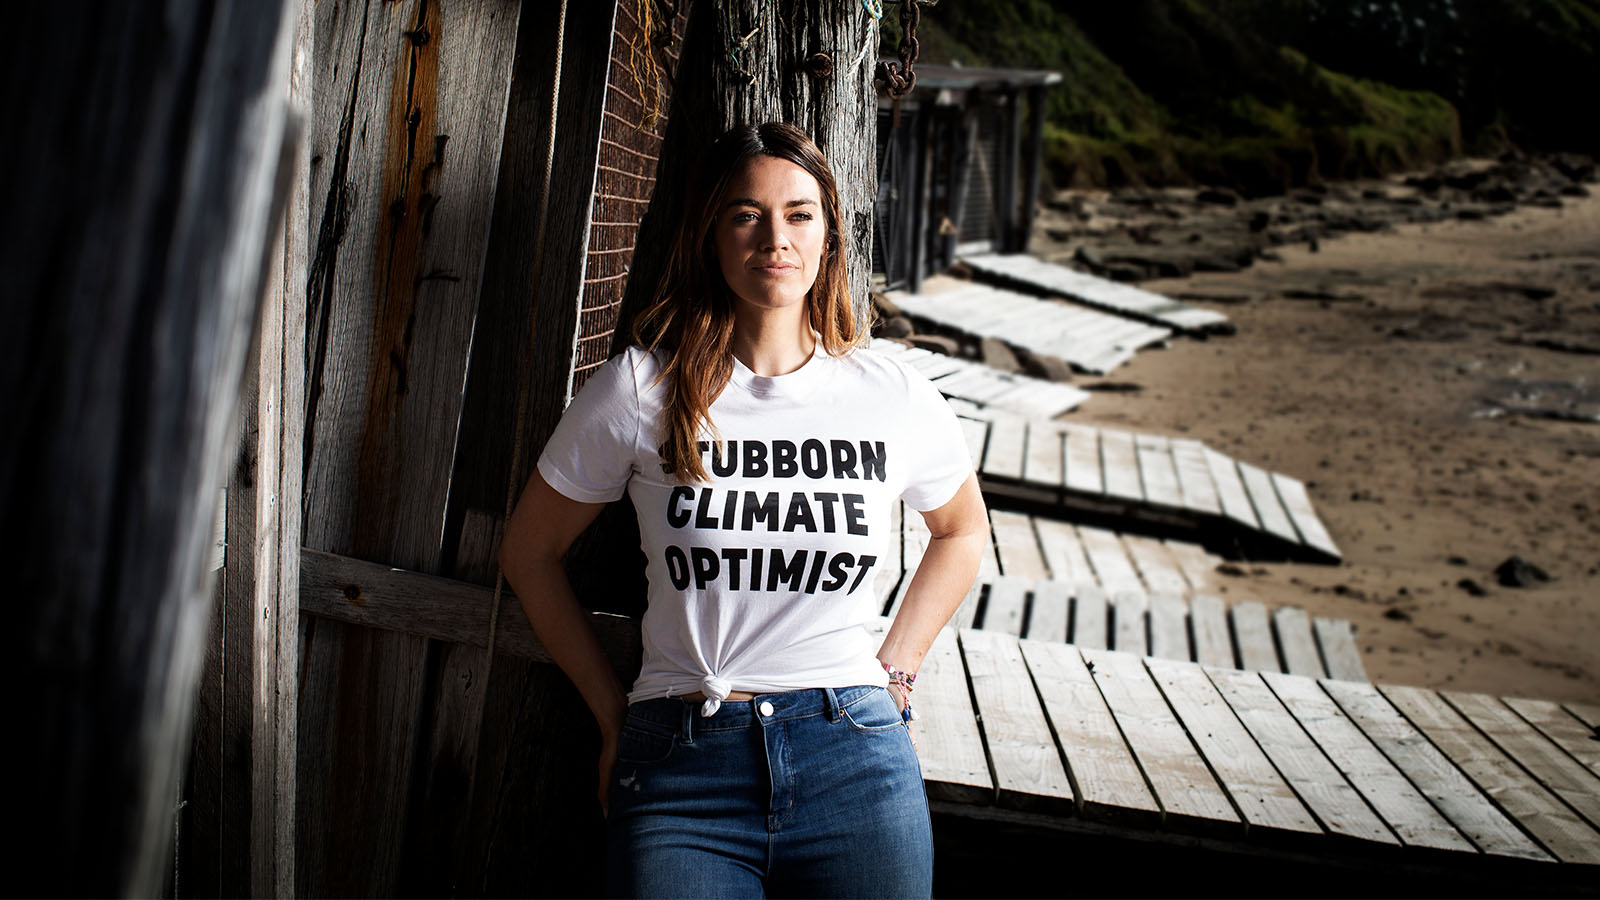 A woman is standing on a beach. she is wearing blue jeans and a white shirt that reads 'Stubborn climate optimist'